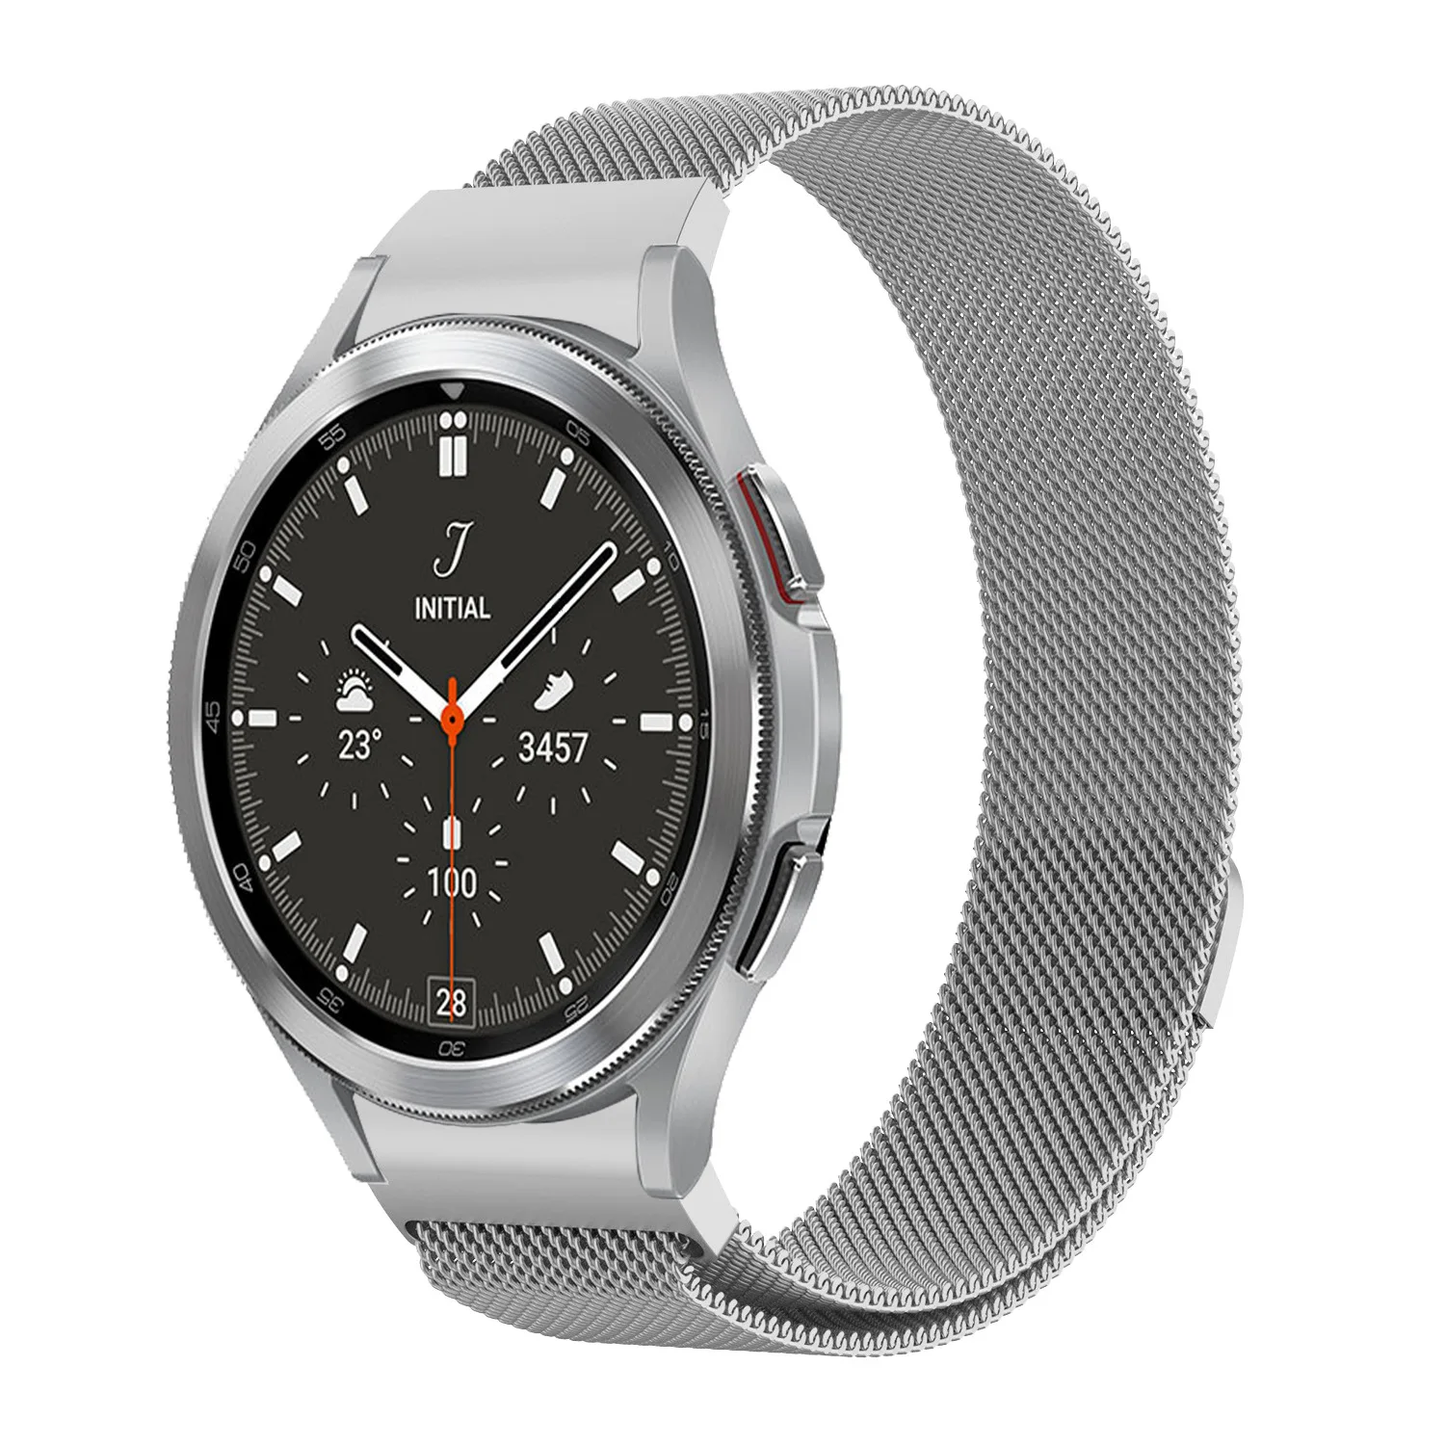 Metallic Silver mesh watch strap with magnetic clasp closure, compatible with Samsung Galaxy Watch 4/5/6 models.